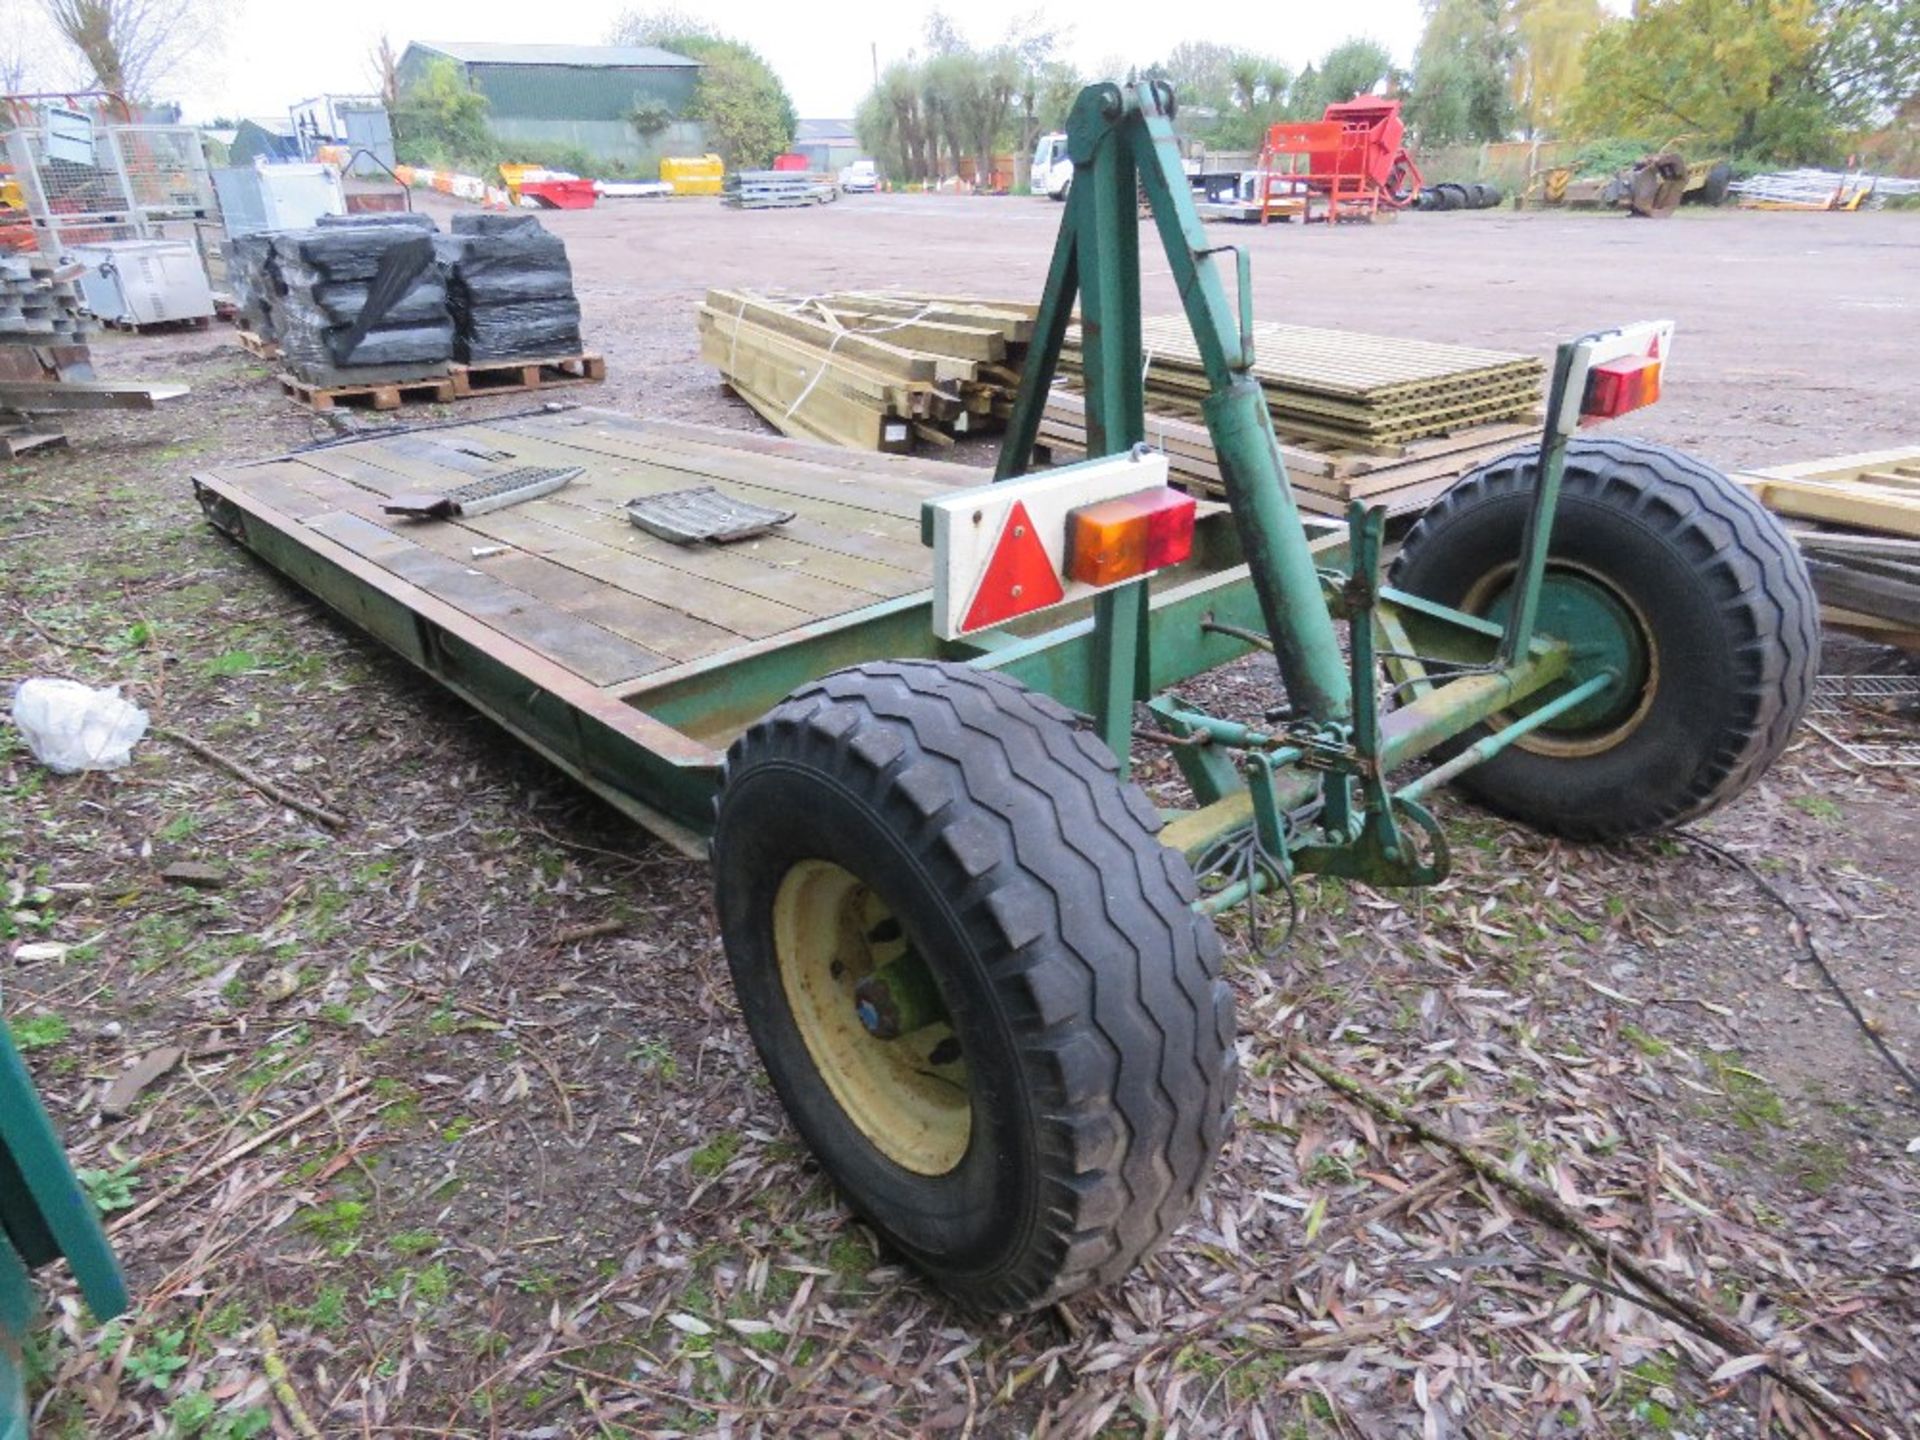 DROP BED SINGLE AXLE TRACTOR DRAWN LOW LOADER TRAILER WITH HYDRAULIC LOWERING BED PLUS 2 SHORT RAMPS - Image 5 of 7